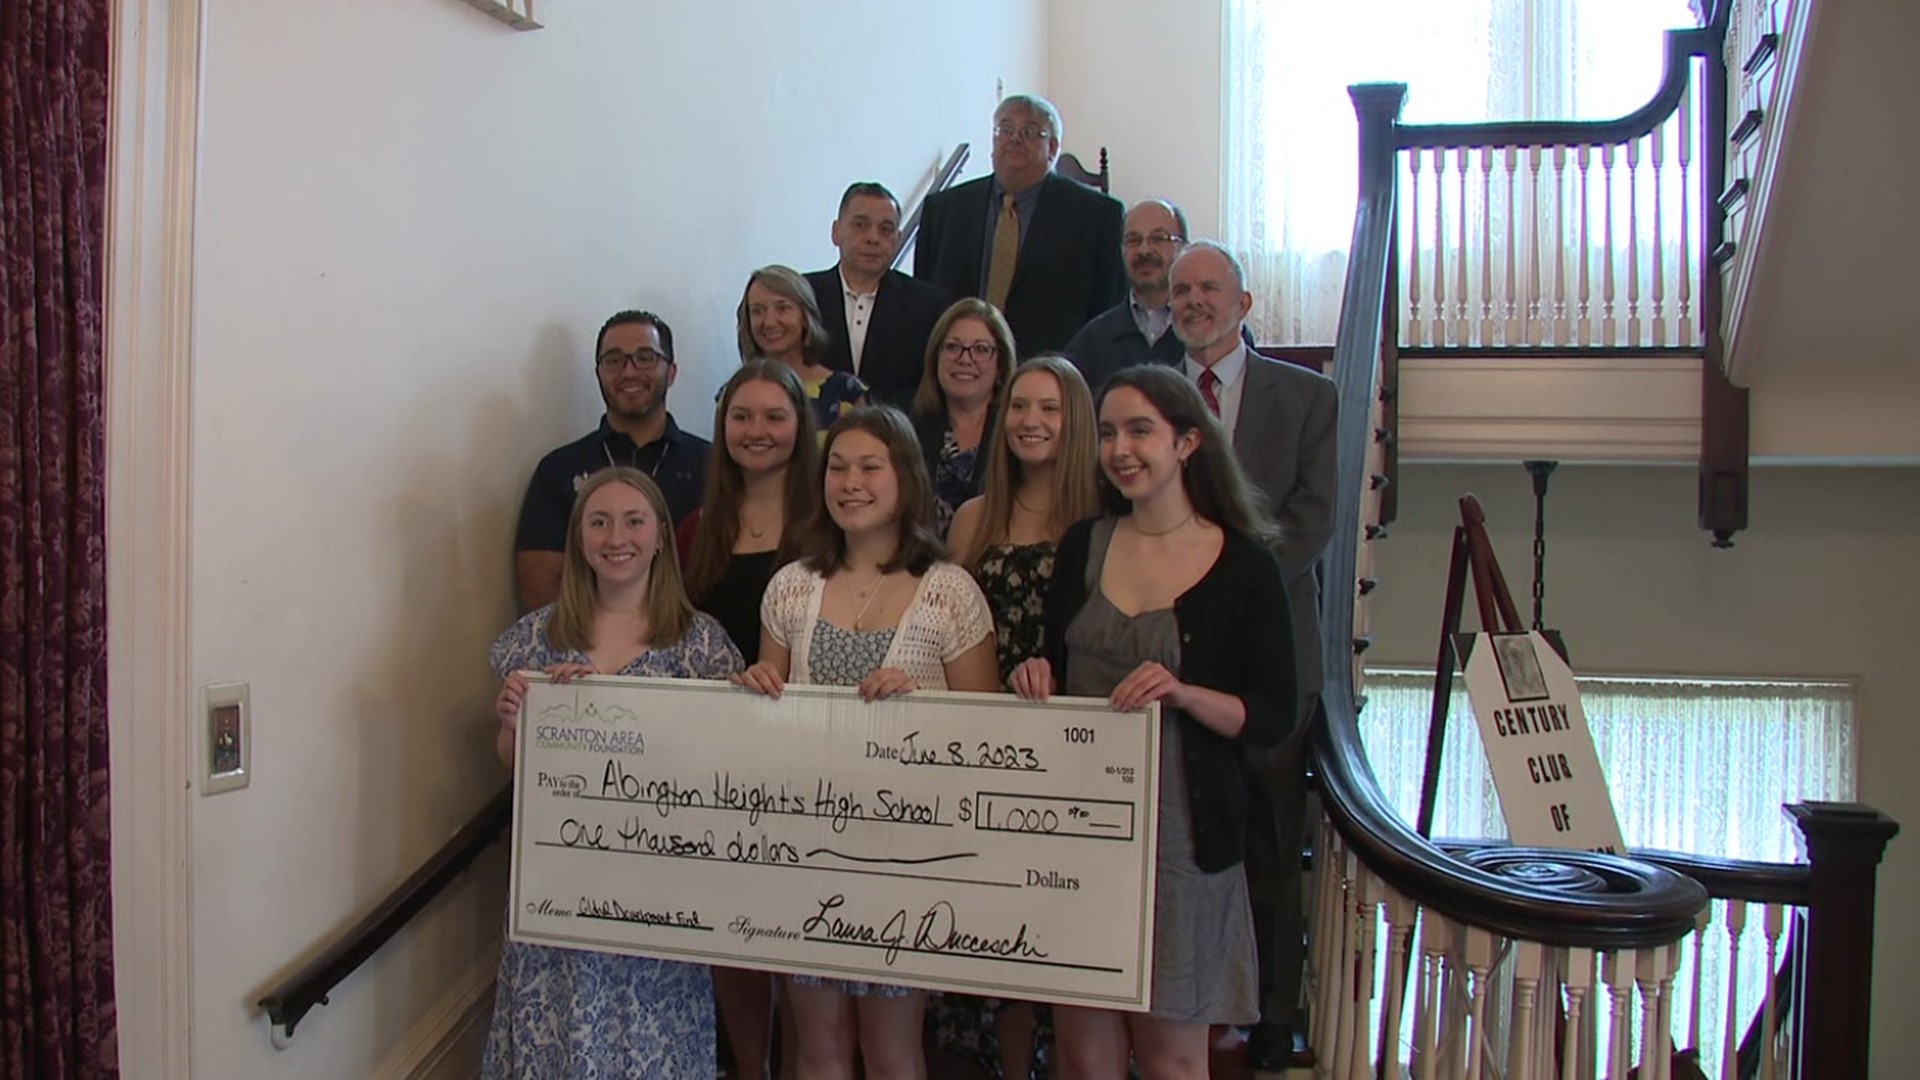 High school students hoping to make the world a better place were awarded grant money to help fund their efforts.